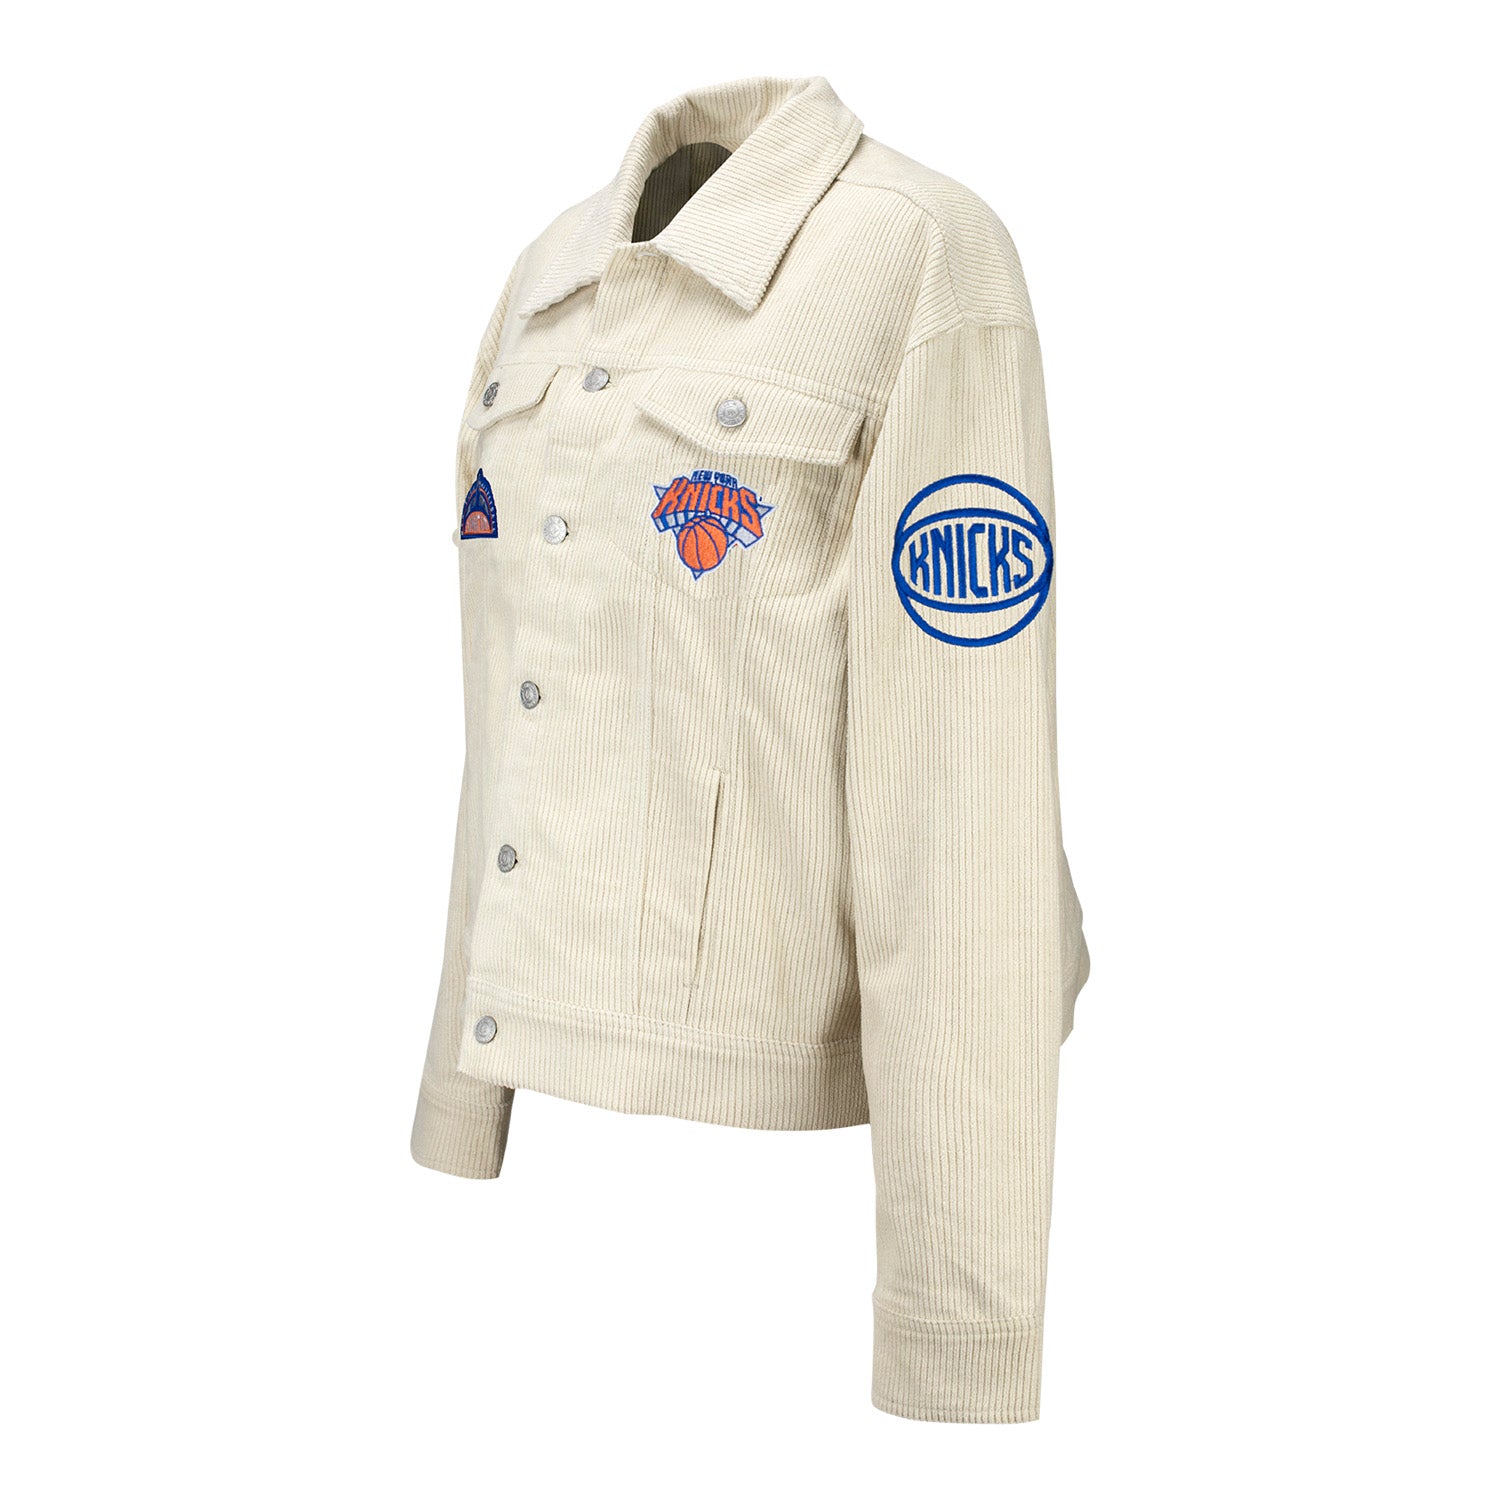 Women's Wild Collective Knicks Corduroy Shacket In White - Angled Left View